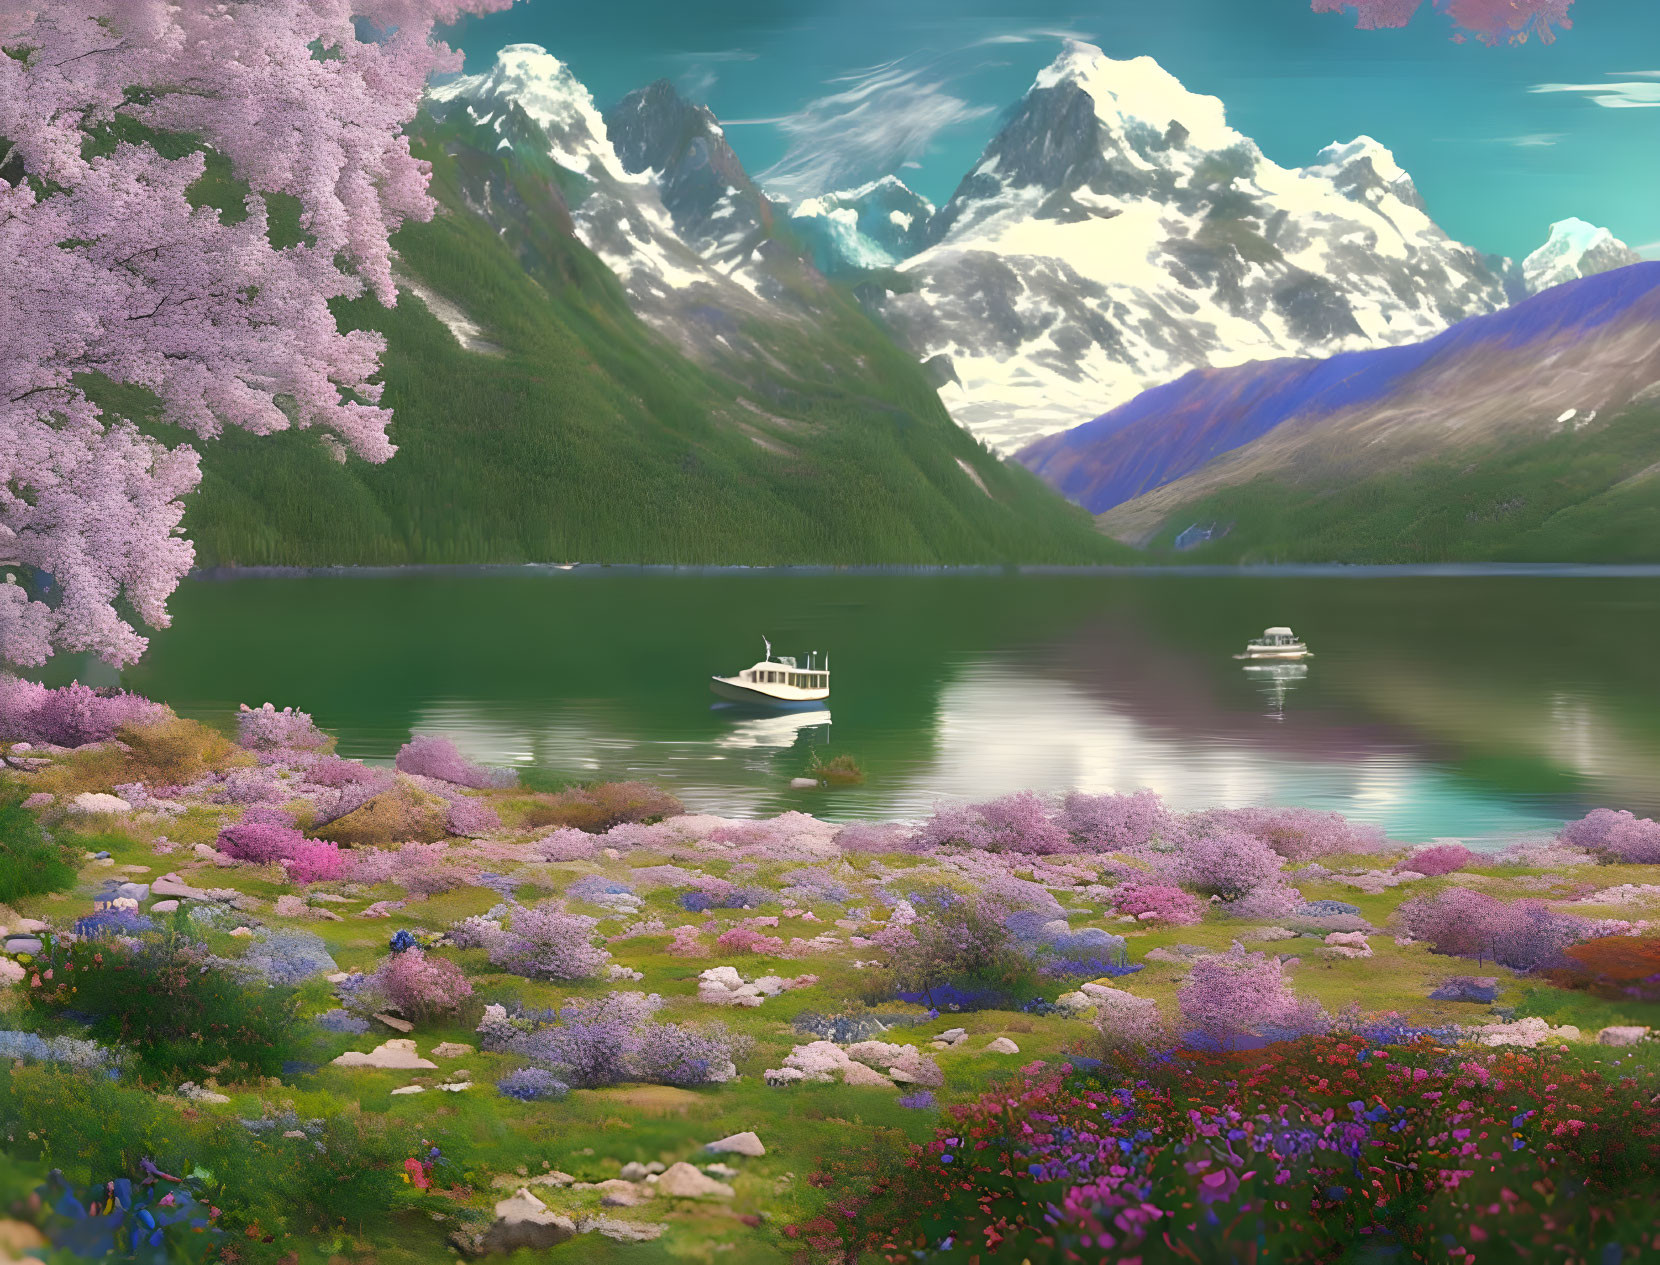 Tranquil lake with blooming flowers, boats, and snow-capped mountains